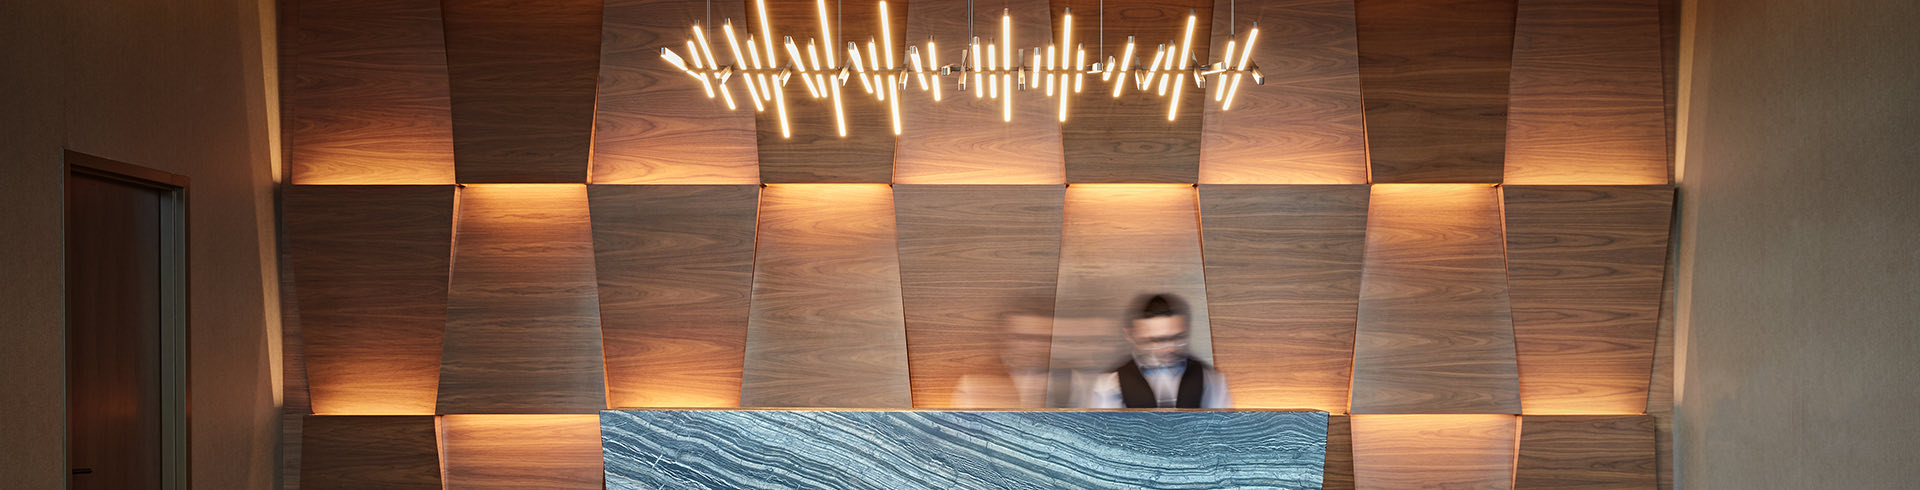 Reception of a hotel and a blurred man in the evening